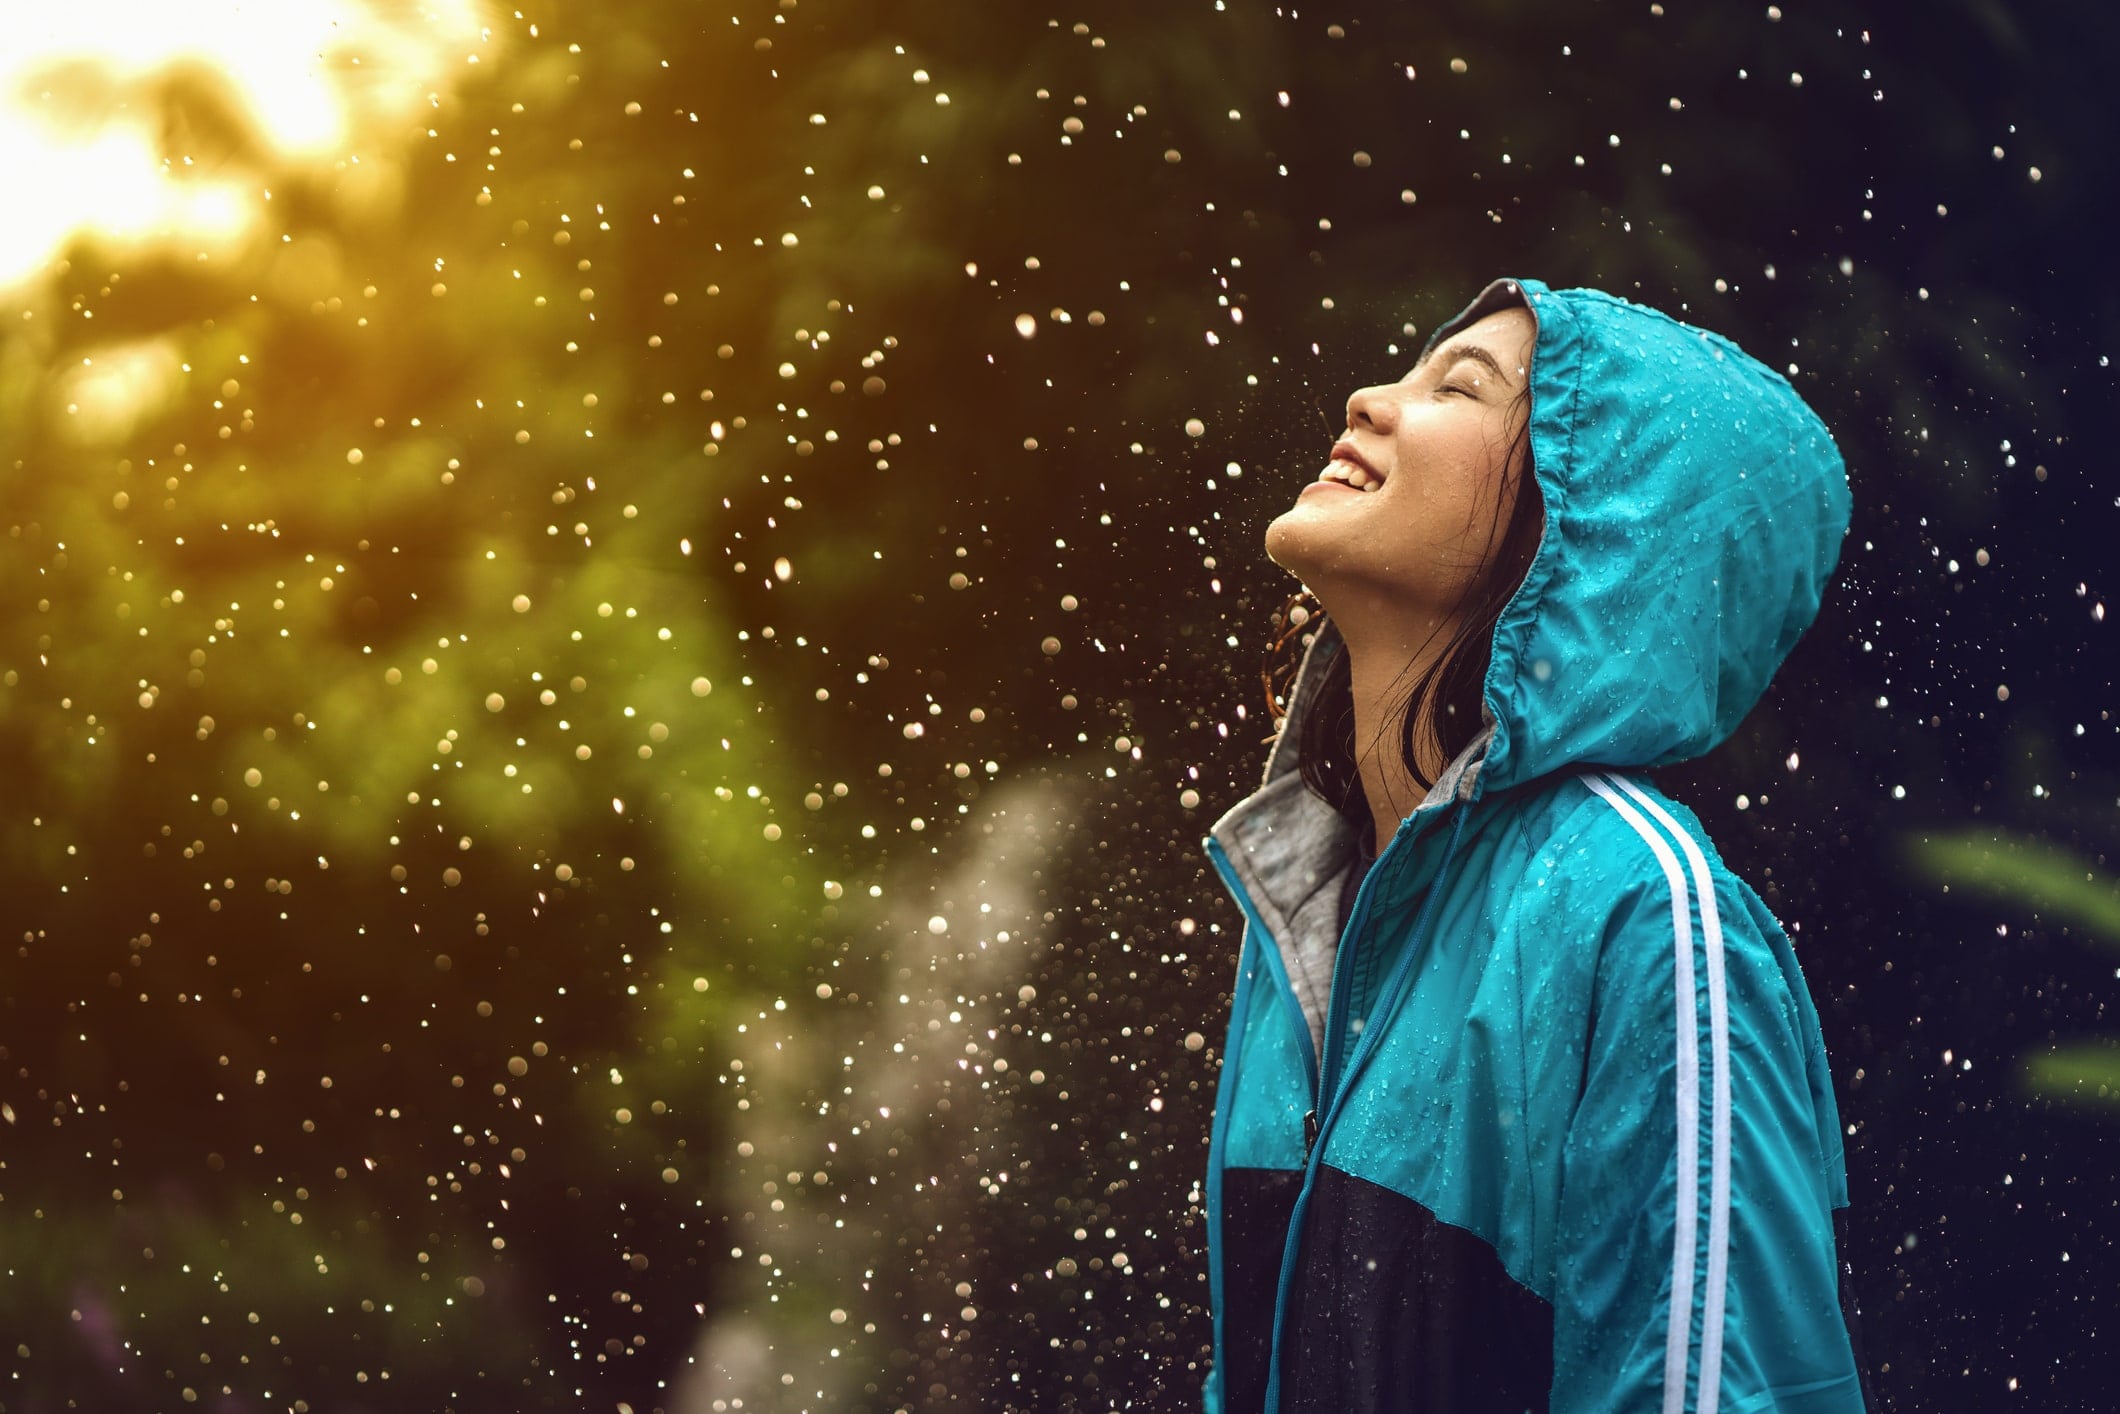 A smiling girl with a hood on her head, is raining